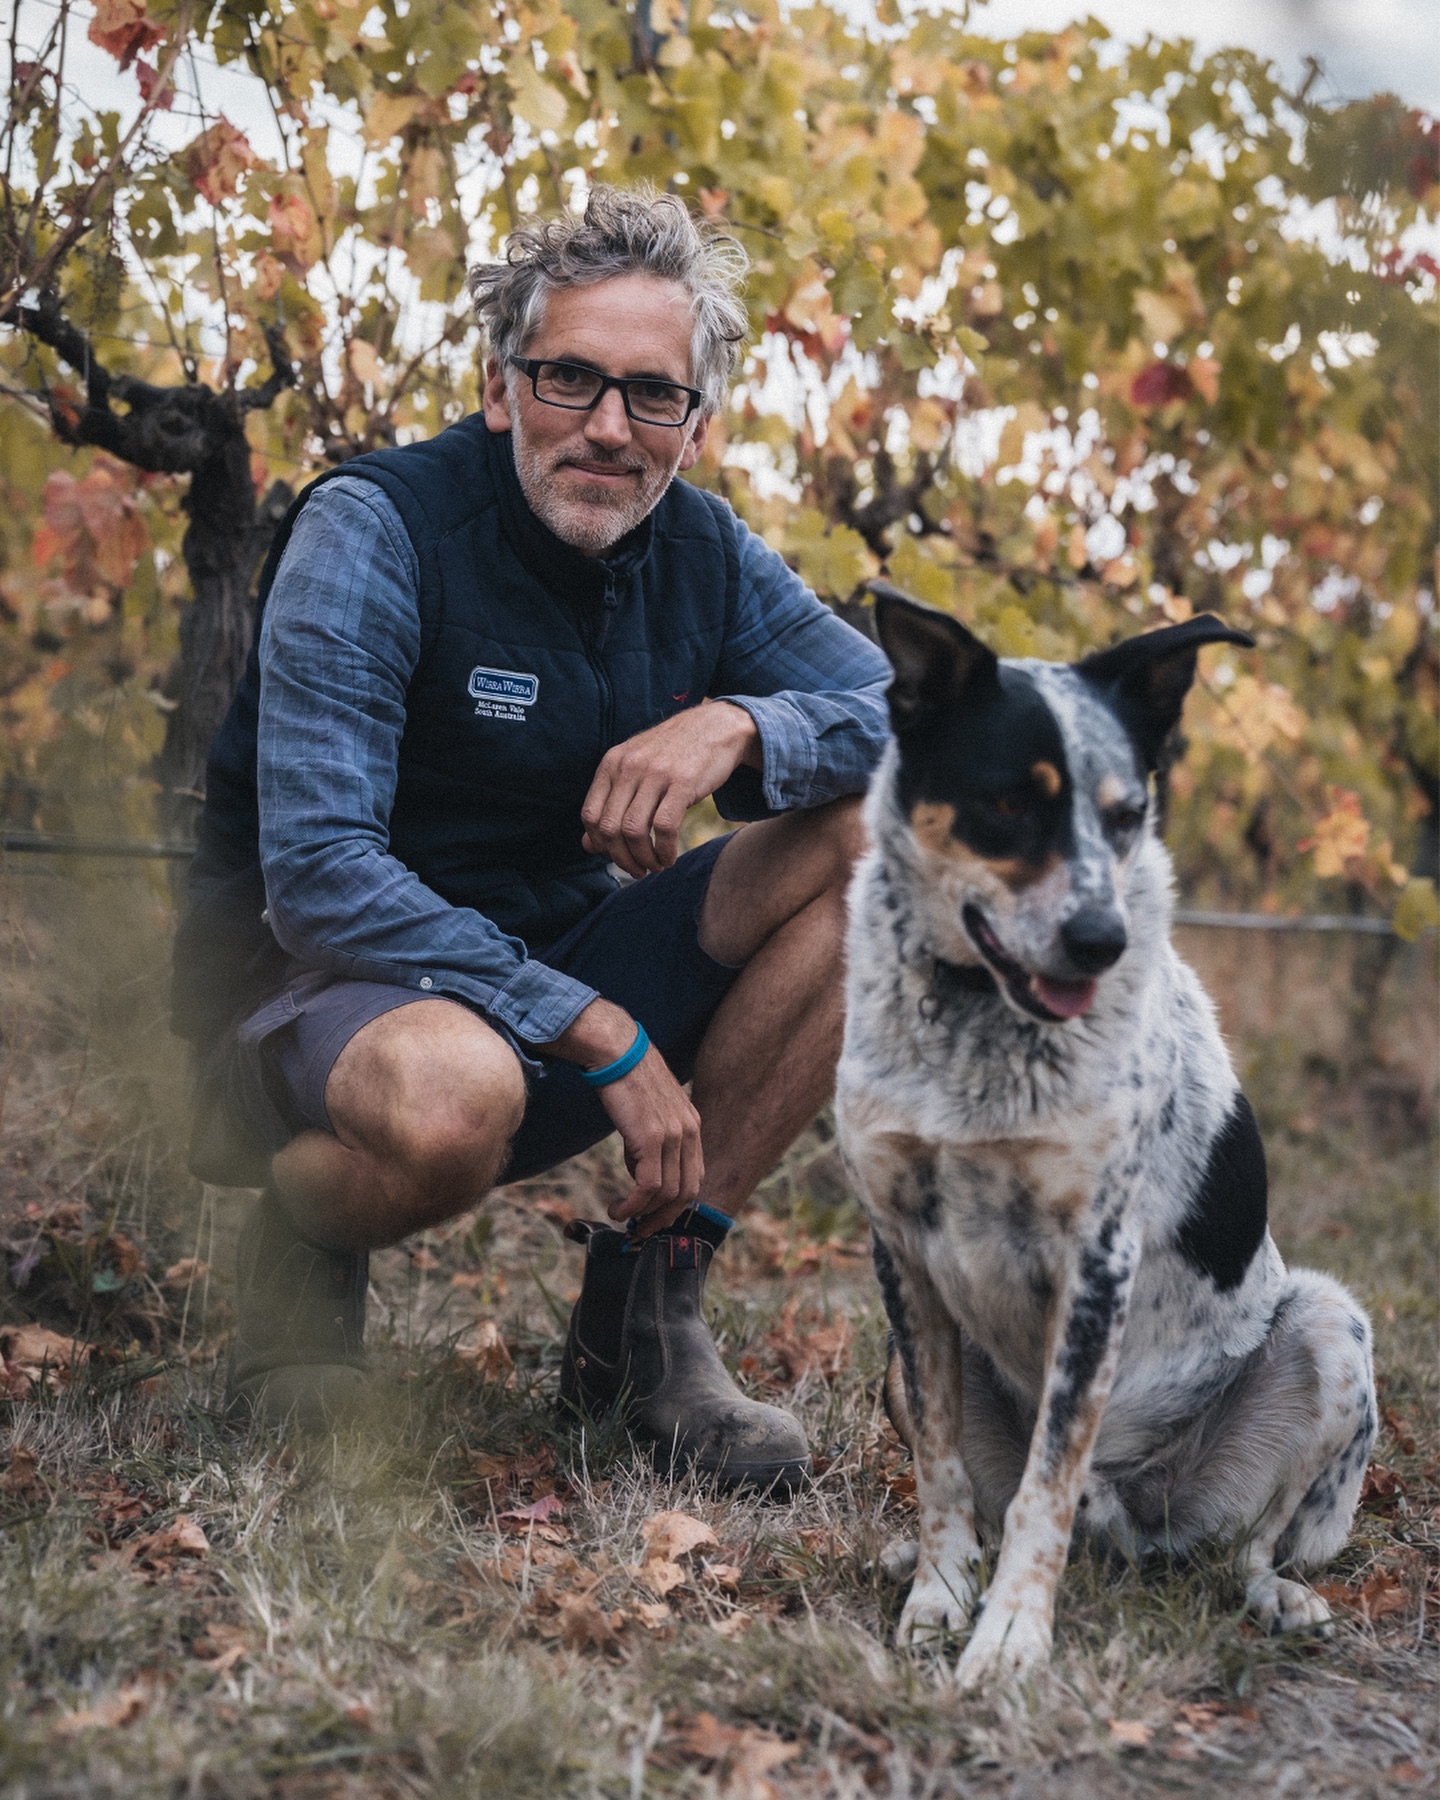 It’s Bring Your Dog to Work Day!🐶🐕🐾

Take a look at these adorable pups living their best lives at a few of our wineries around the world:

1. Barney checking on the vines with @wirrawirrawines viticulturist, Anton
2. Barney taking a break with @wirrawirrawines site manager, Shane
3. Barney with his four-legged friend Lamborghini 🐑 (best name ever)
4. Noah the Shar Pei strutting his stuff at @zindhumbrecht 
5. Skye with @jackson_estate viticulturist Wiremu Matthews
6 @jackson_estate winemaker Matt Patterson-Green with his dog, Flynn 
7. Flynn breaking hearts from the back of a ute 😍
8. @jackson_estate vineyard manager Graeme with Jedd (left) and Bob (right)
9 & 10. Aiko taking in the gorgeous views at @domaenewachau 

#BringYourDogToWorkDay #WineryPups #jacksonestate #domainewachau #wirrawirra #wirrawirrawine #dzh #zindhumbrecht #dogs #dogsofinstagram #doglover #vineyard #winerydogs #winedog #dogsandwine